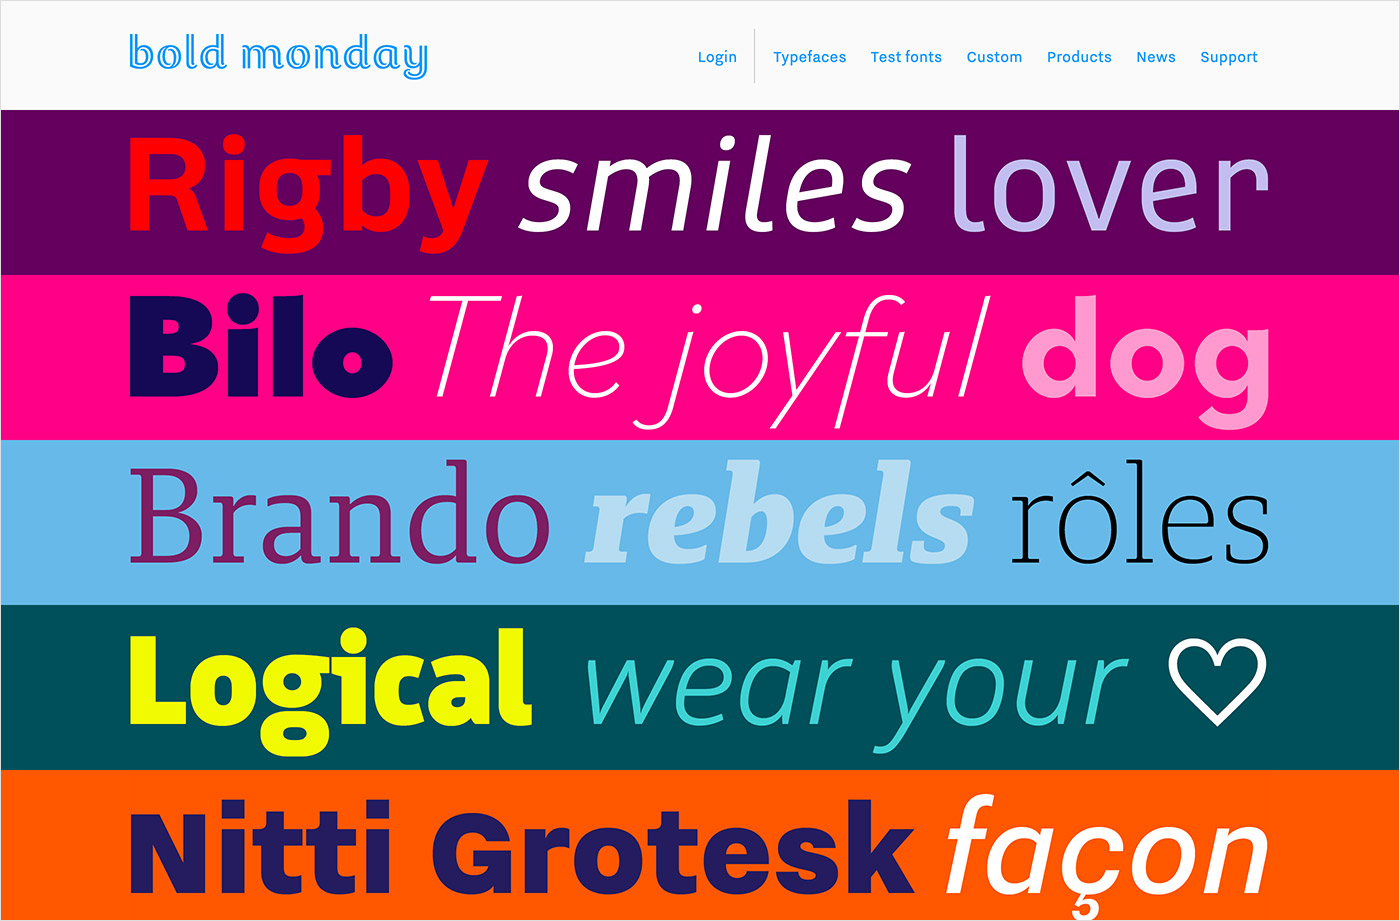 Bold Monday – independent font foundry of high quality typeウェブサイトの画面キャプチャ画像